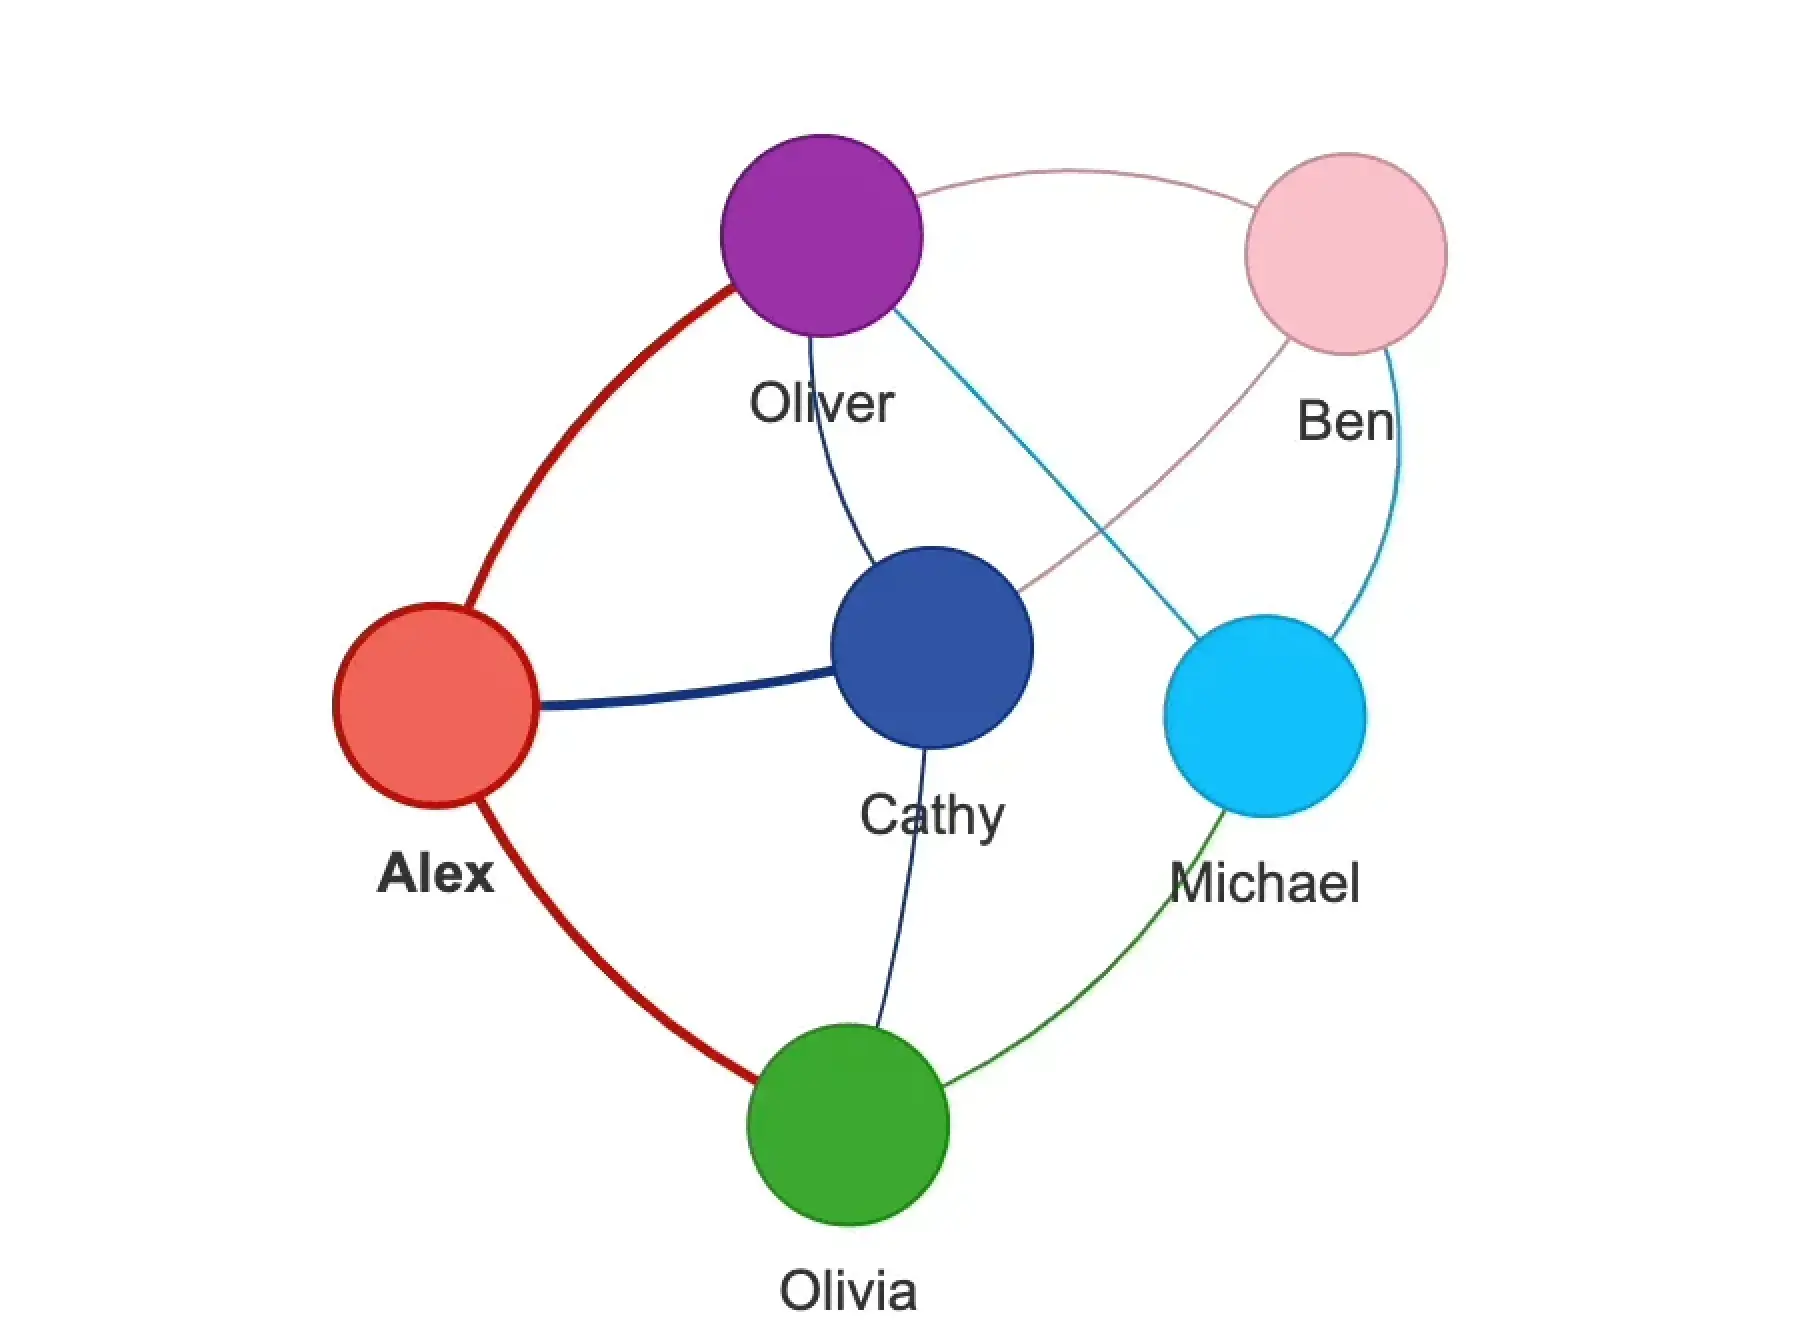 Pyvis: Visualize Interactive Network Graphs in Python